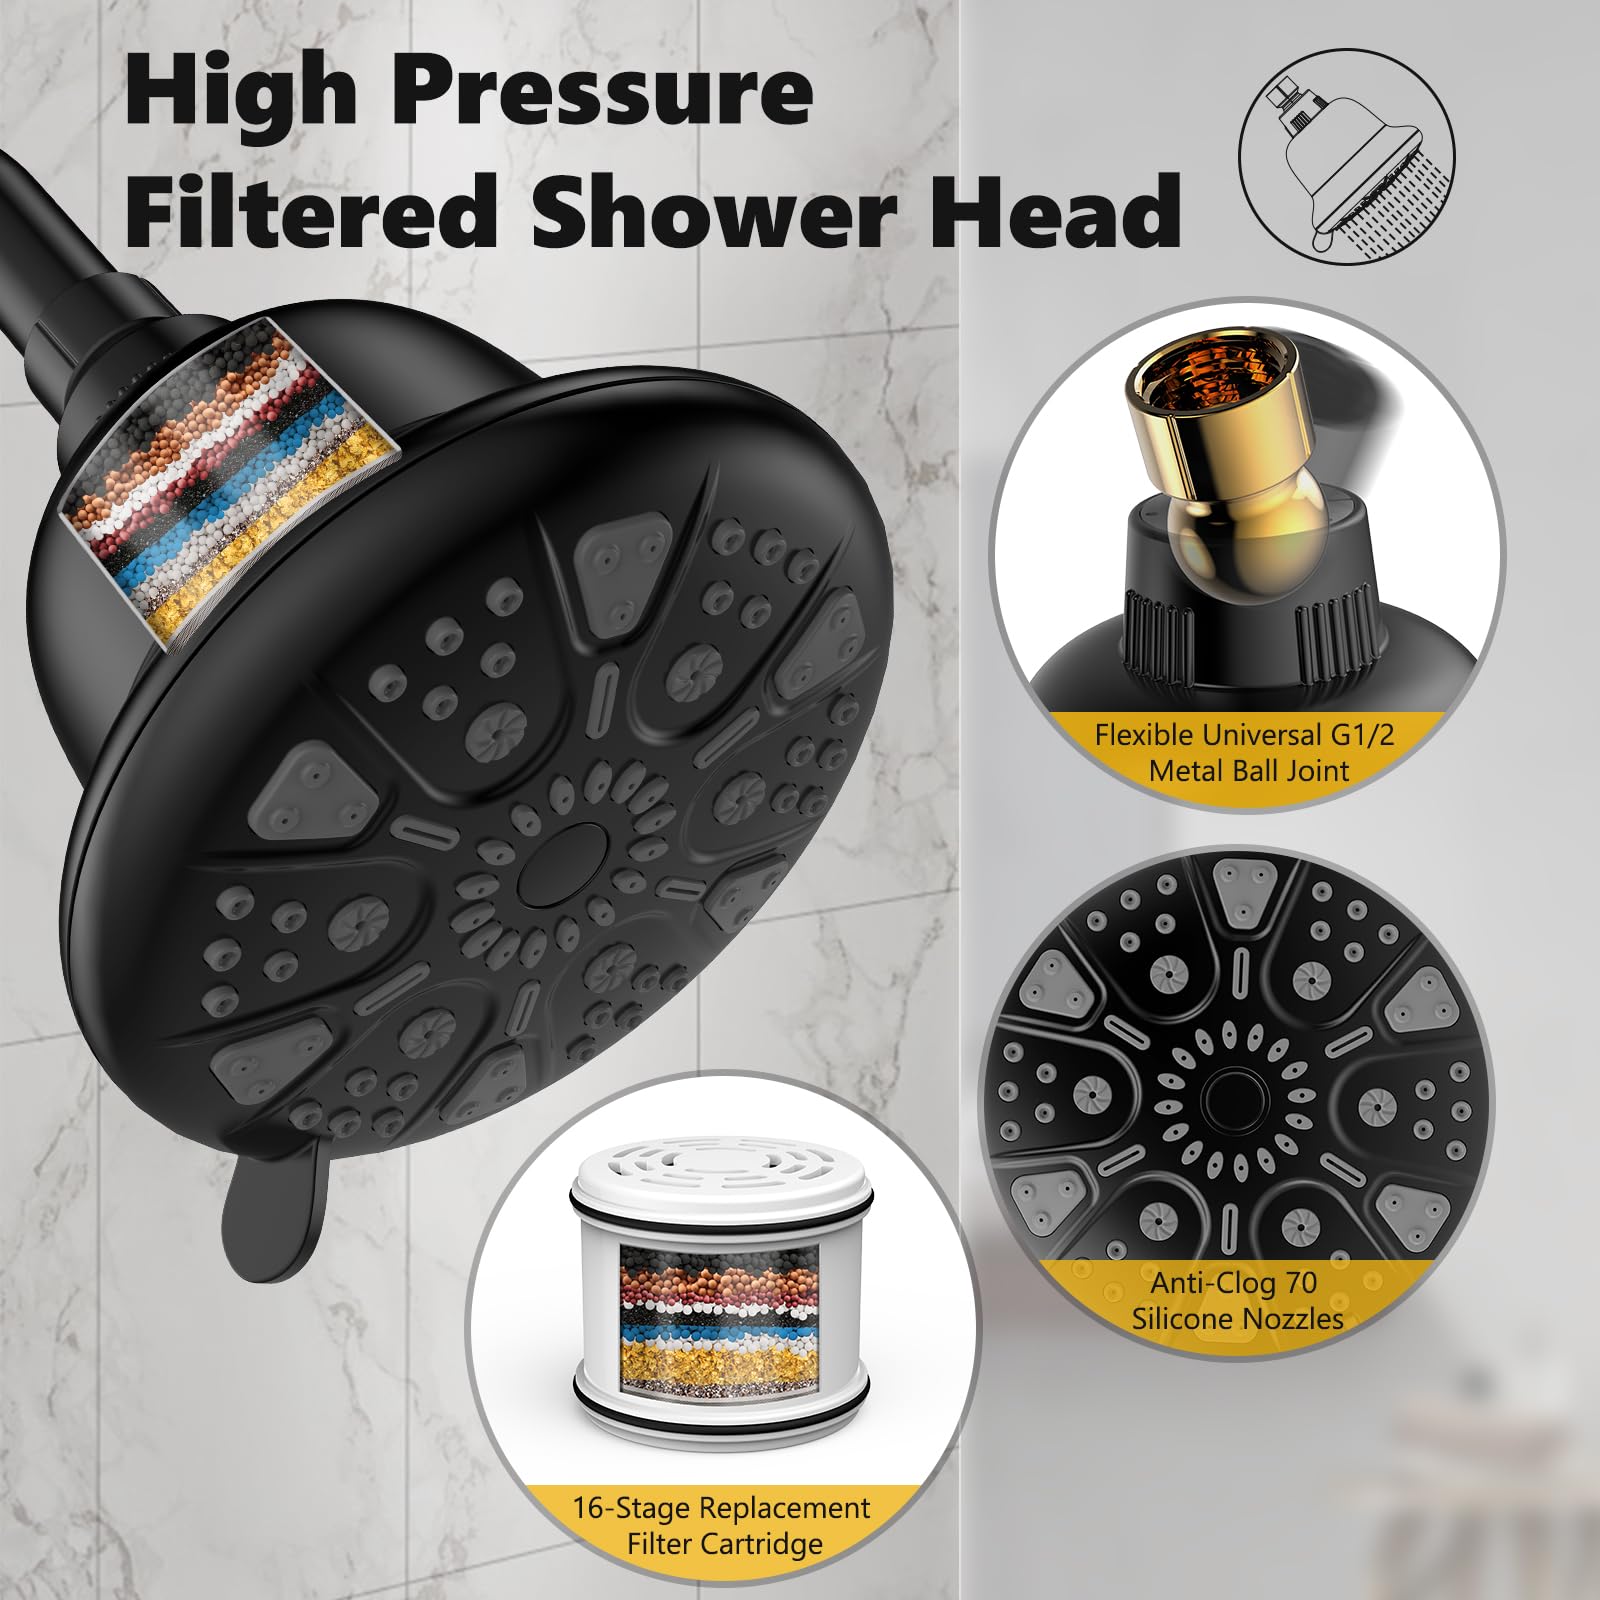 DAKINGS Filtered Shower Head, High Pressure 16-Stage Shower Head Filter for Hard Water Luxury 7 Settings Adjustable Water Softener Shower Head Remove Chlorine and Harmful Substances